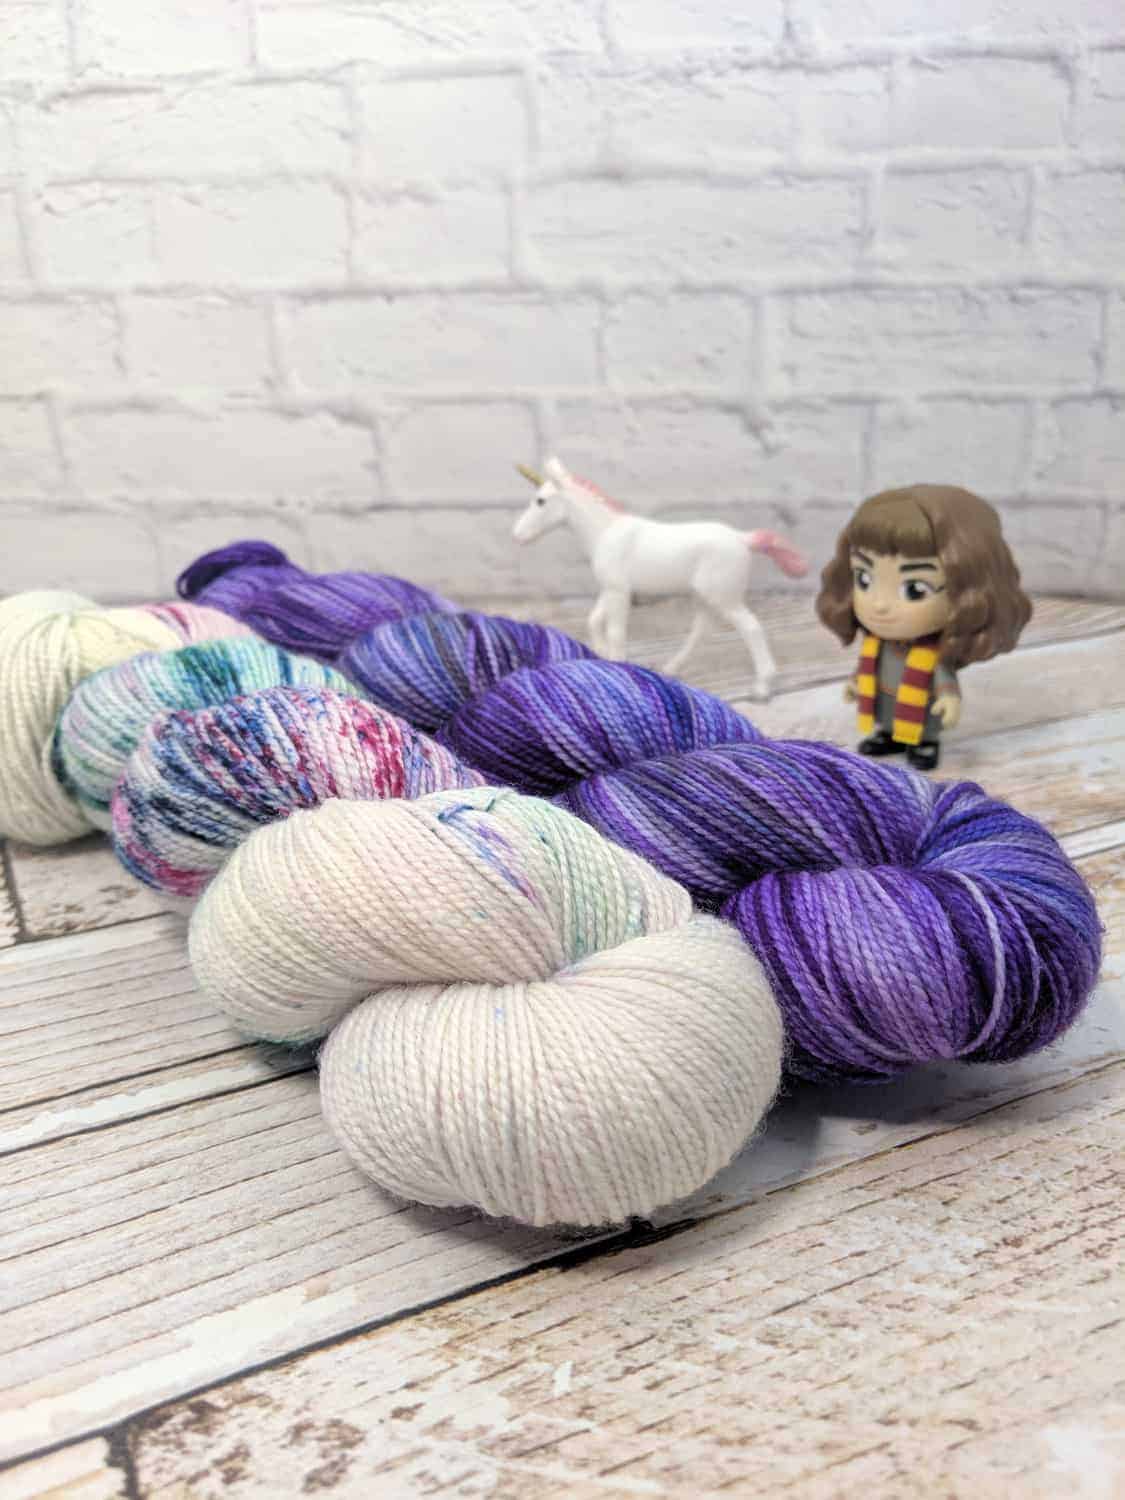 Purple and speckled yarn.